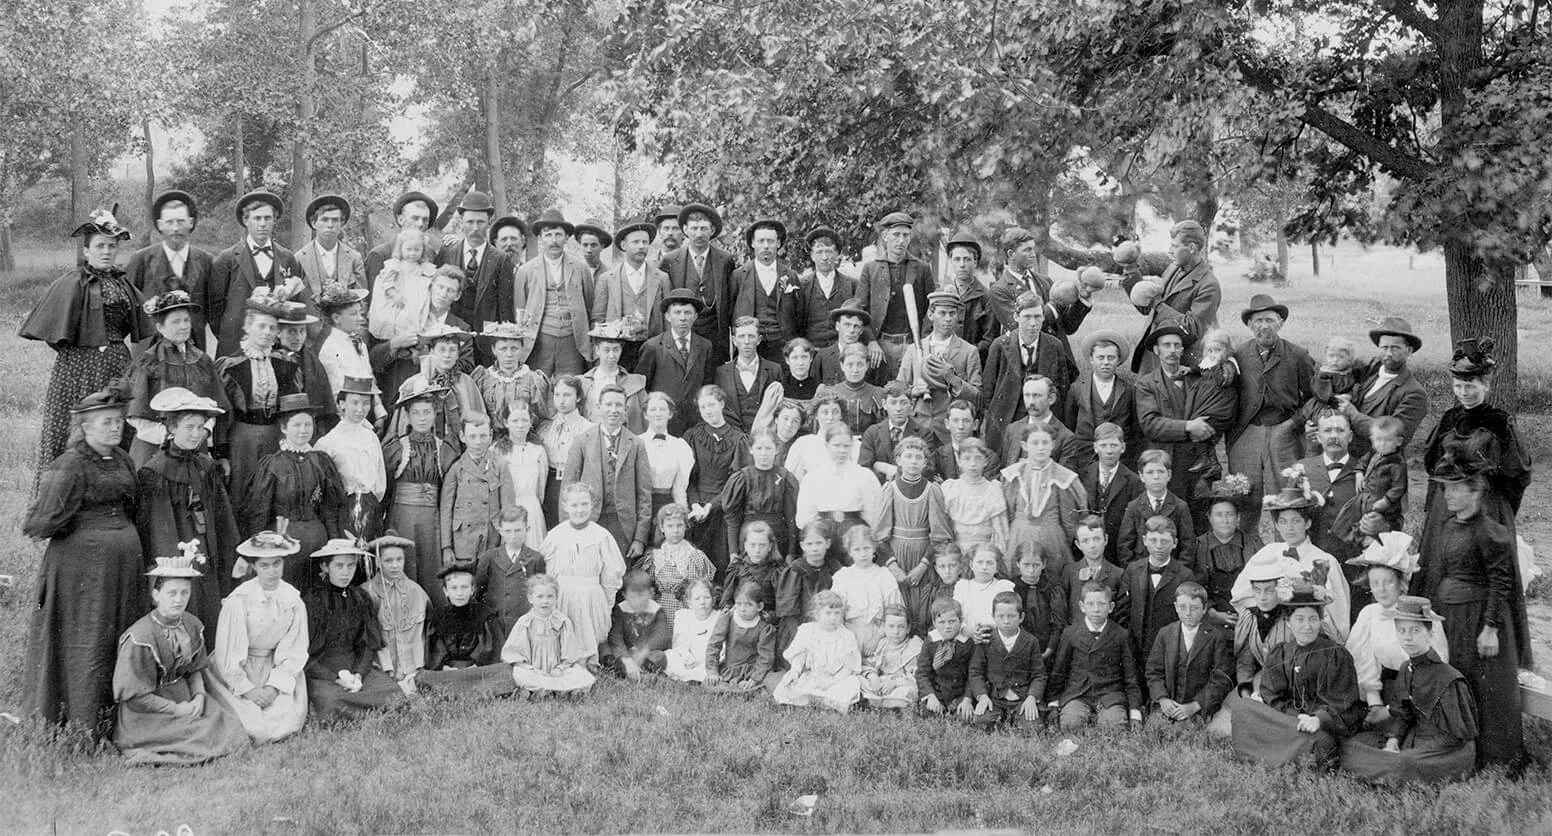 Black and white photo of a large group of men, women, and children, dressed in formal attire. There are over 50 people in the photo.